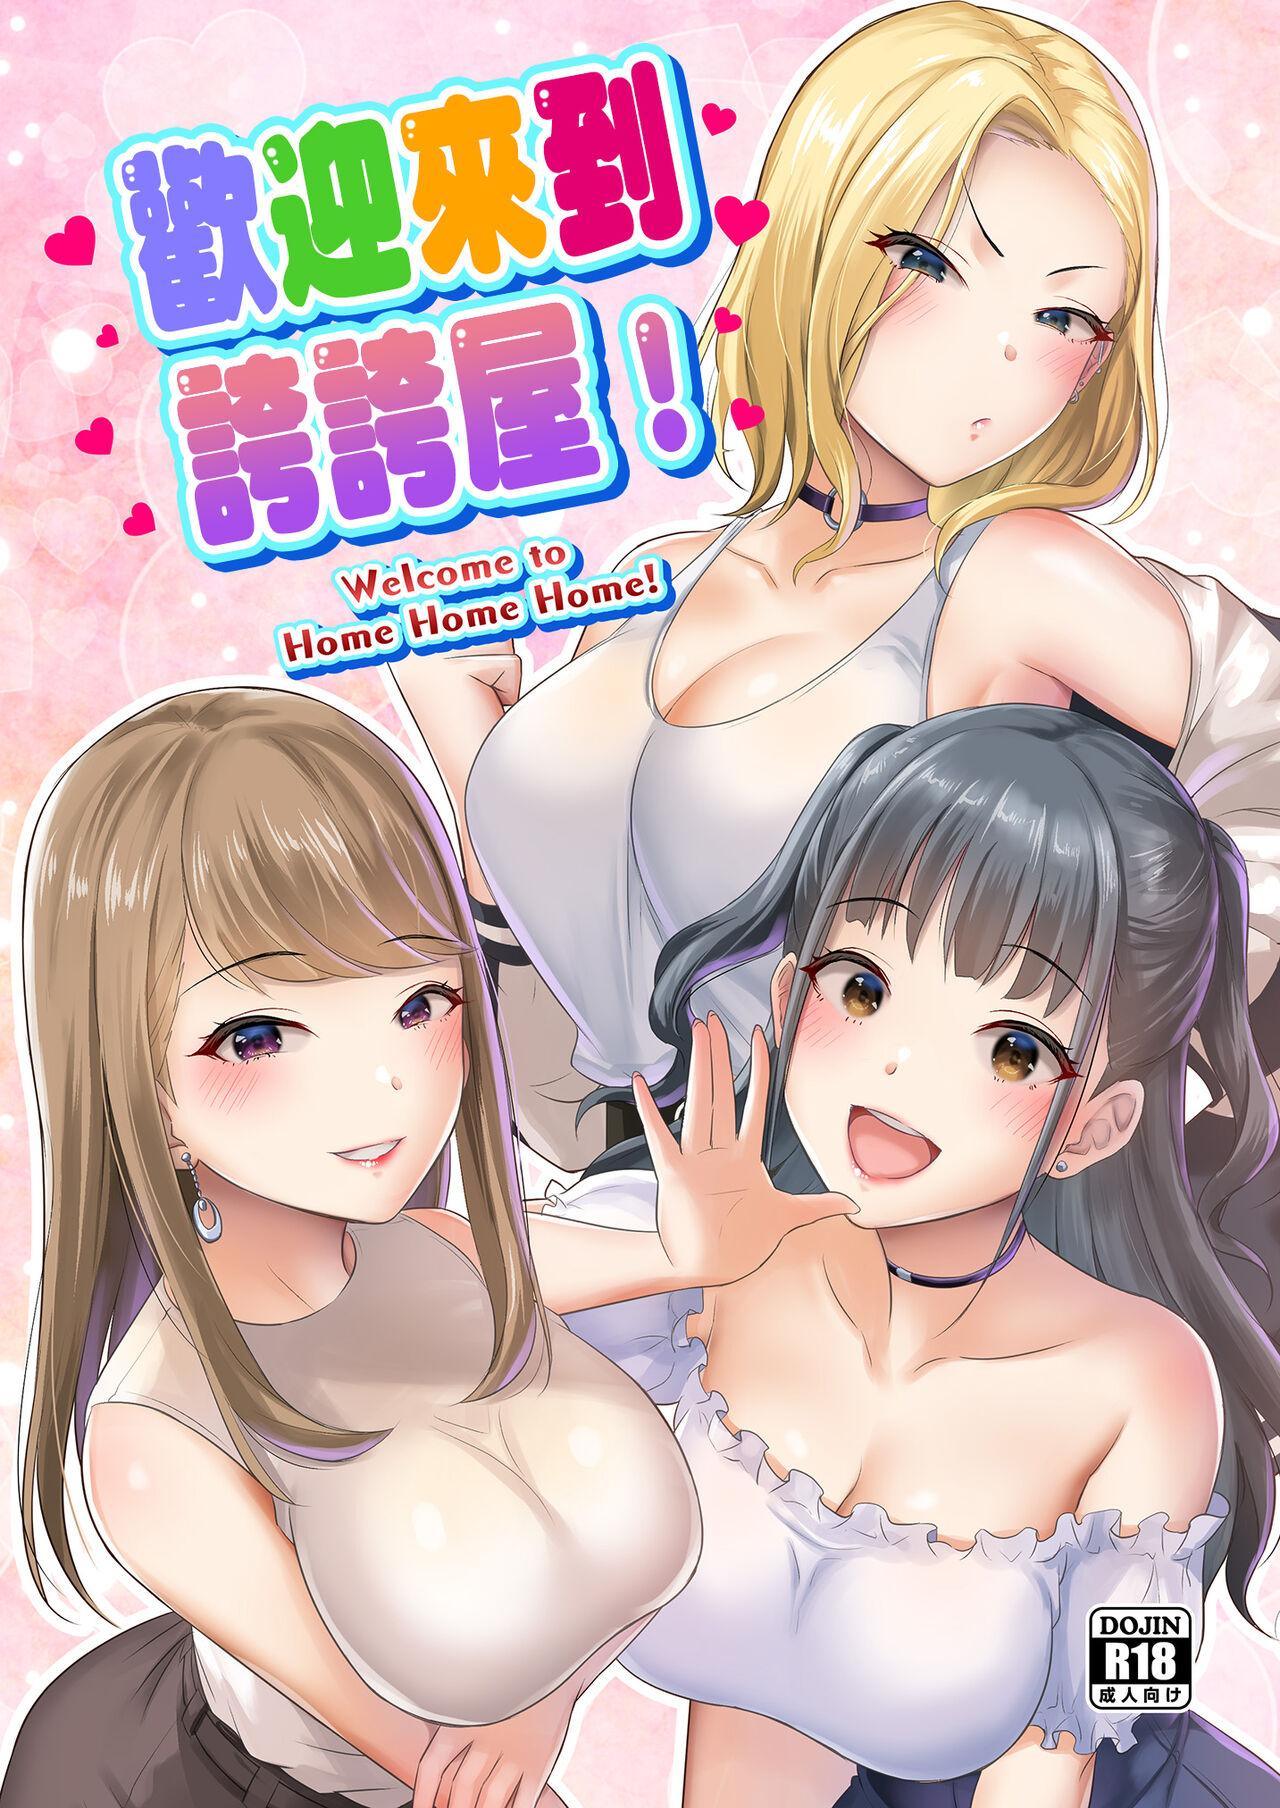 Piercings Homehome Home e Youkoso! - Welcome to Home Home Home! | 歡迎來到誇誇屋！ Sister - Page 2